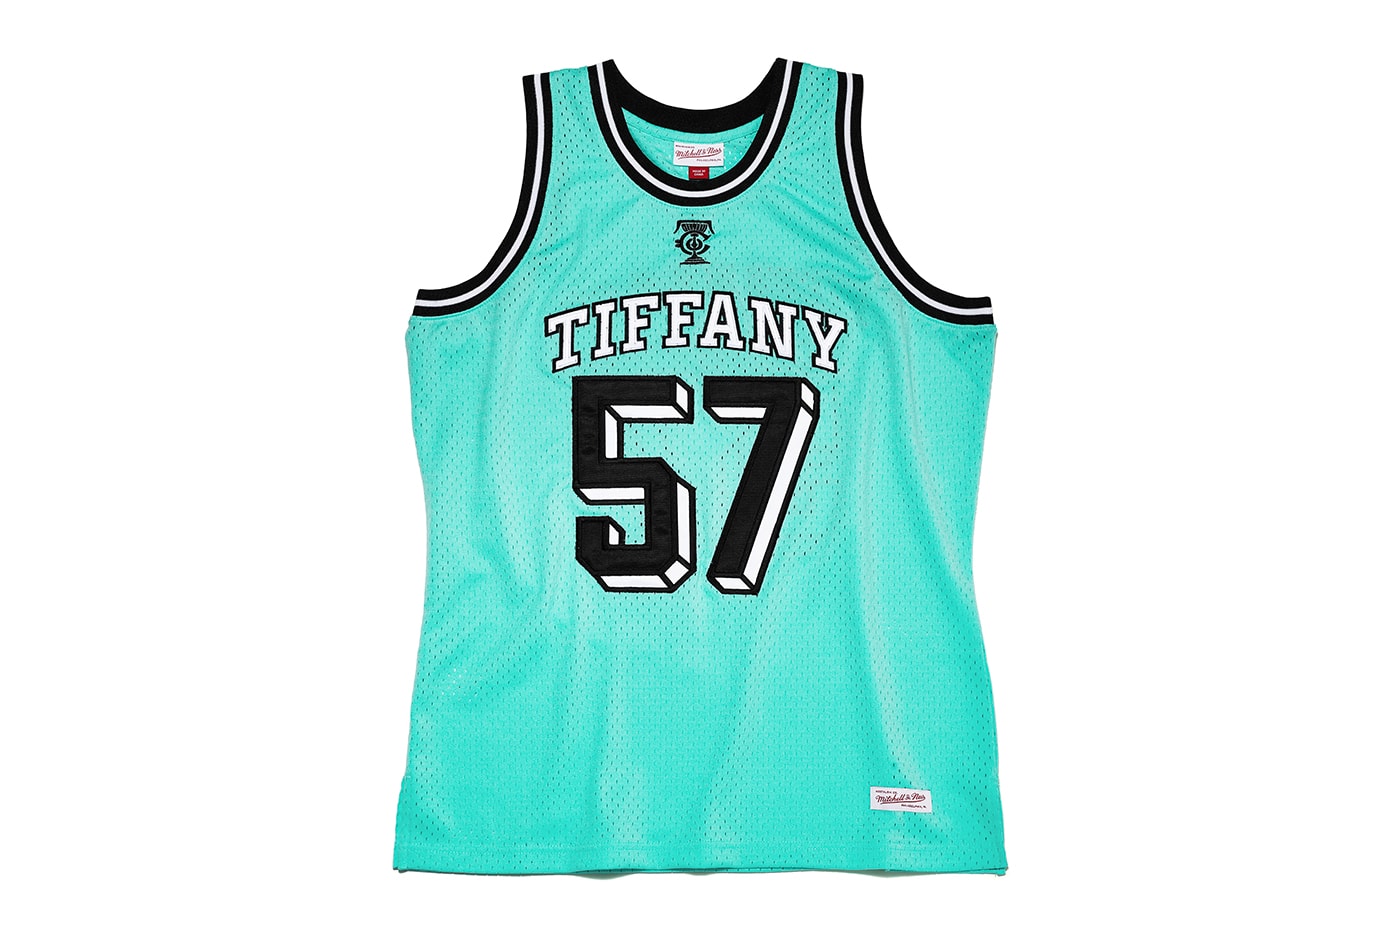 Mitchell and Ness, Tiffany and Co. team up for Super Bowl jersey